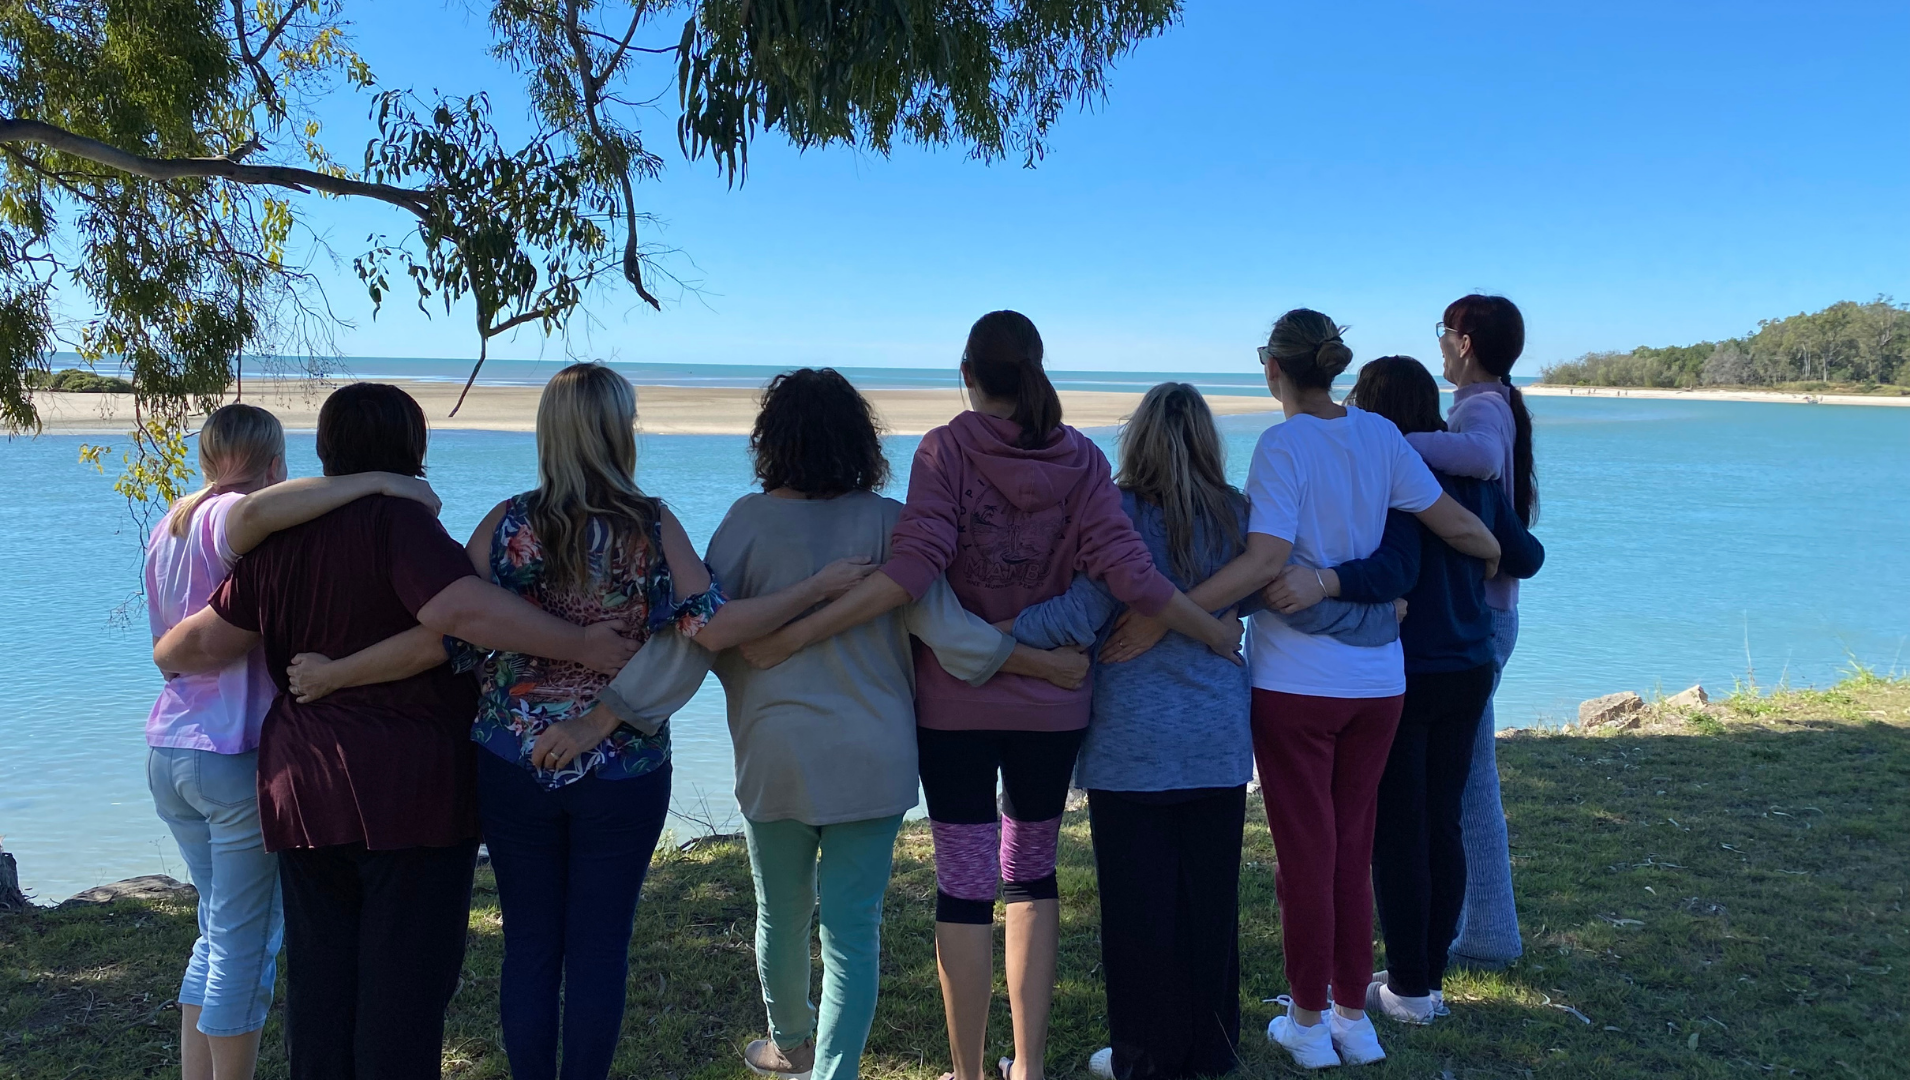 It's a bright sunny, clear day and 9 women stand facing a glistening body of water, embracing by wrapping arms around each others' waists